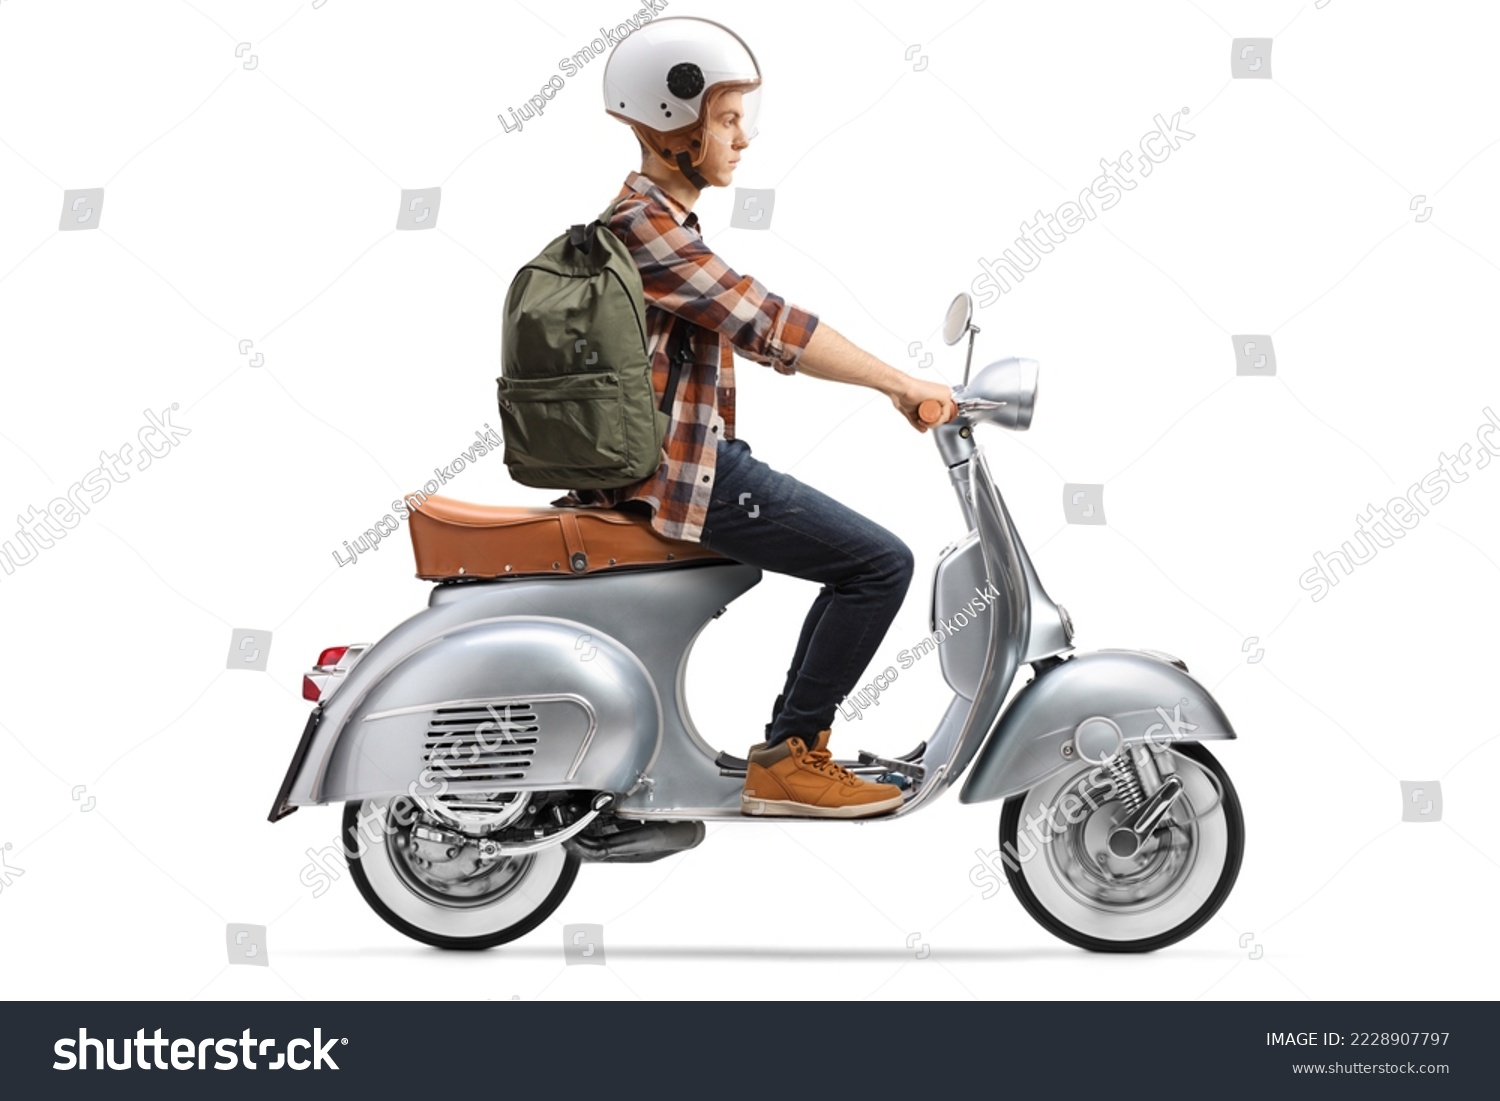 Male student with a helmet riding a scooter isolated on white background #2228907797